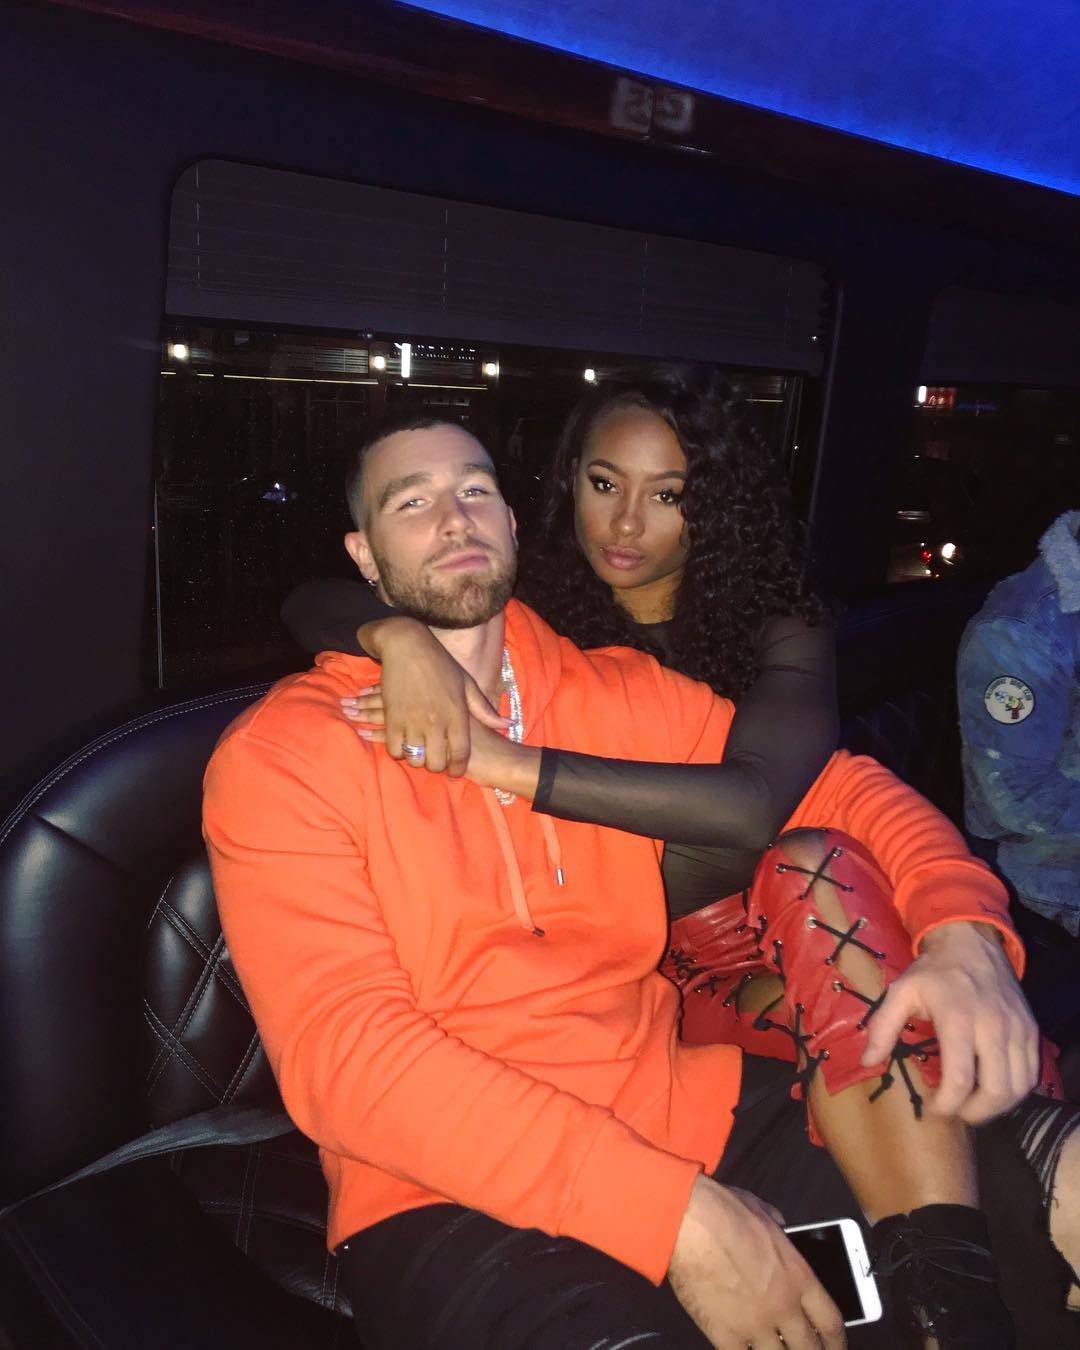 Travis Kelce And His Girlfriend Kayla Nicole Were Boo'd Up At Game